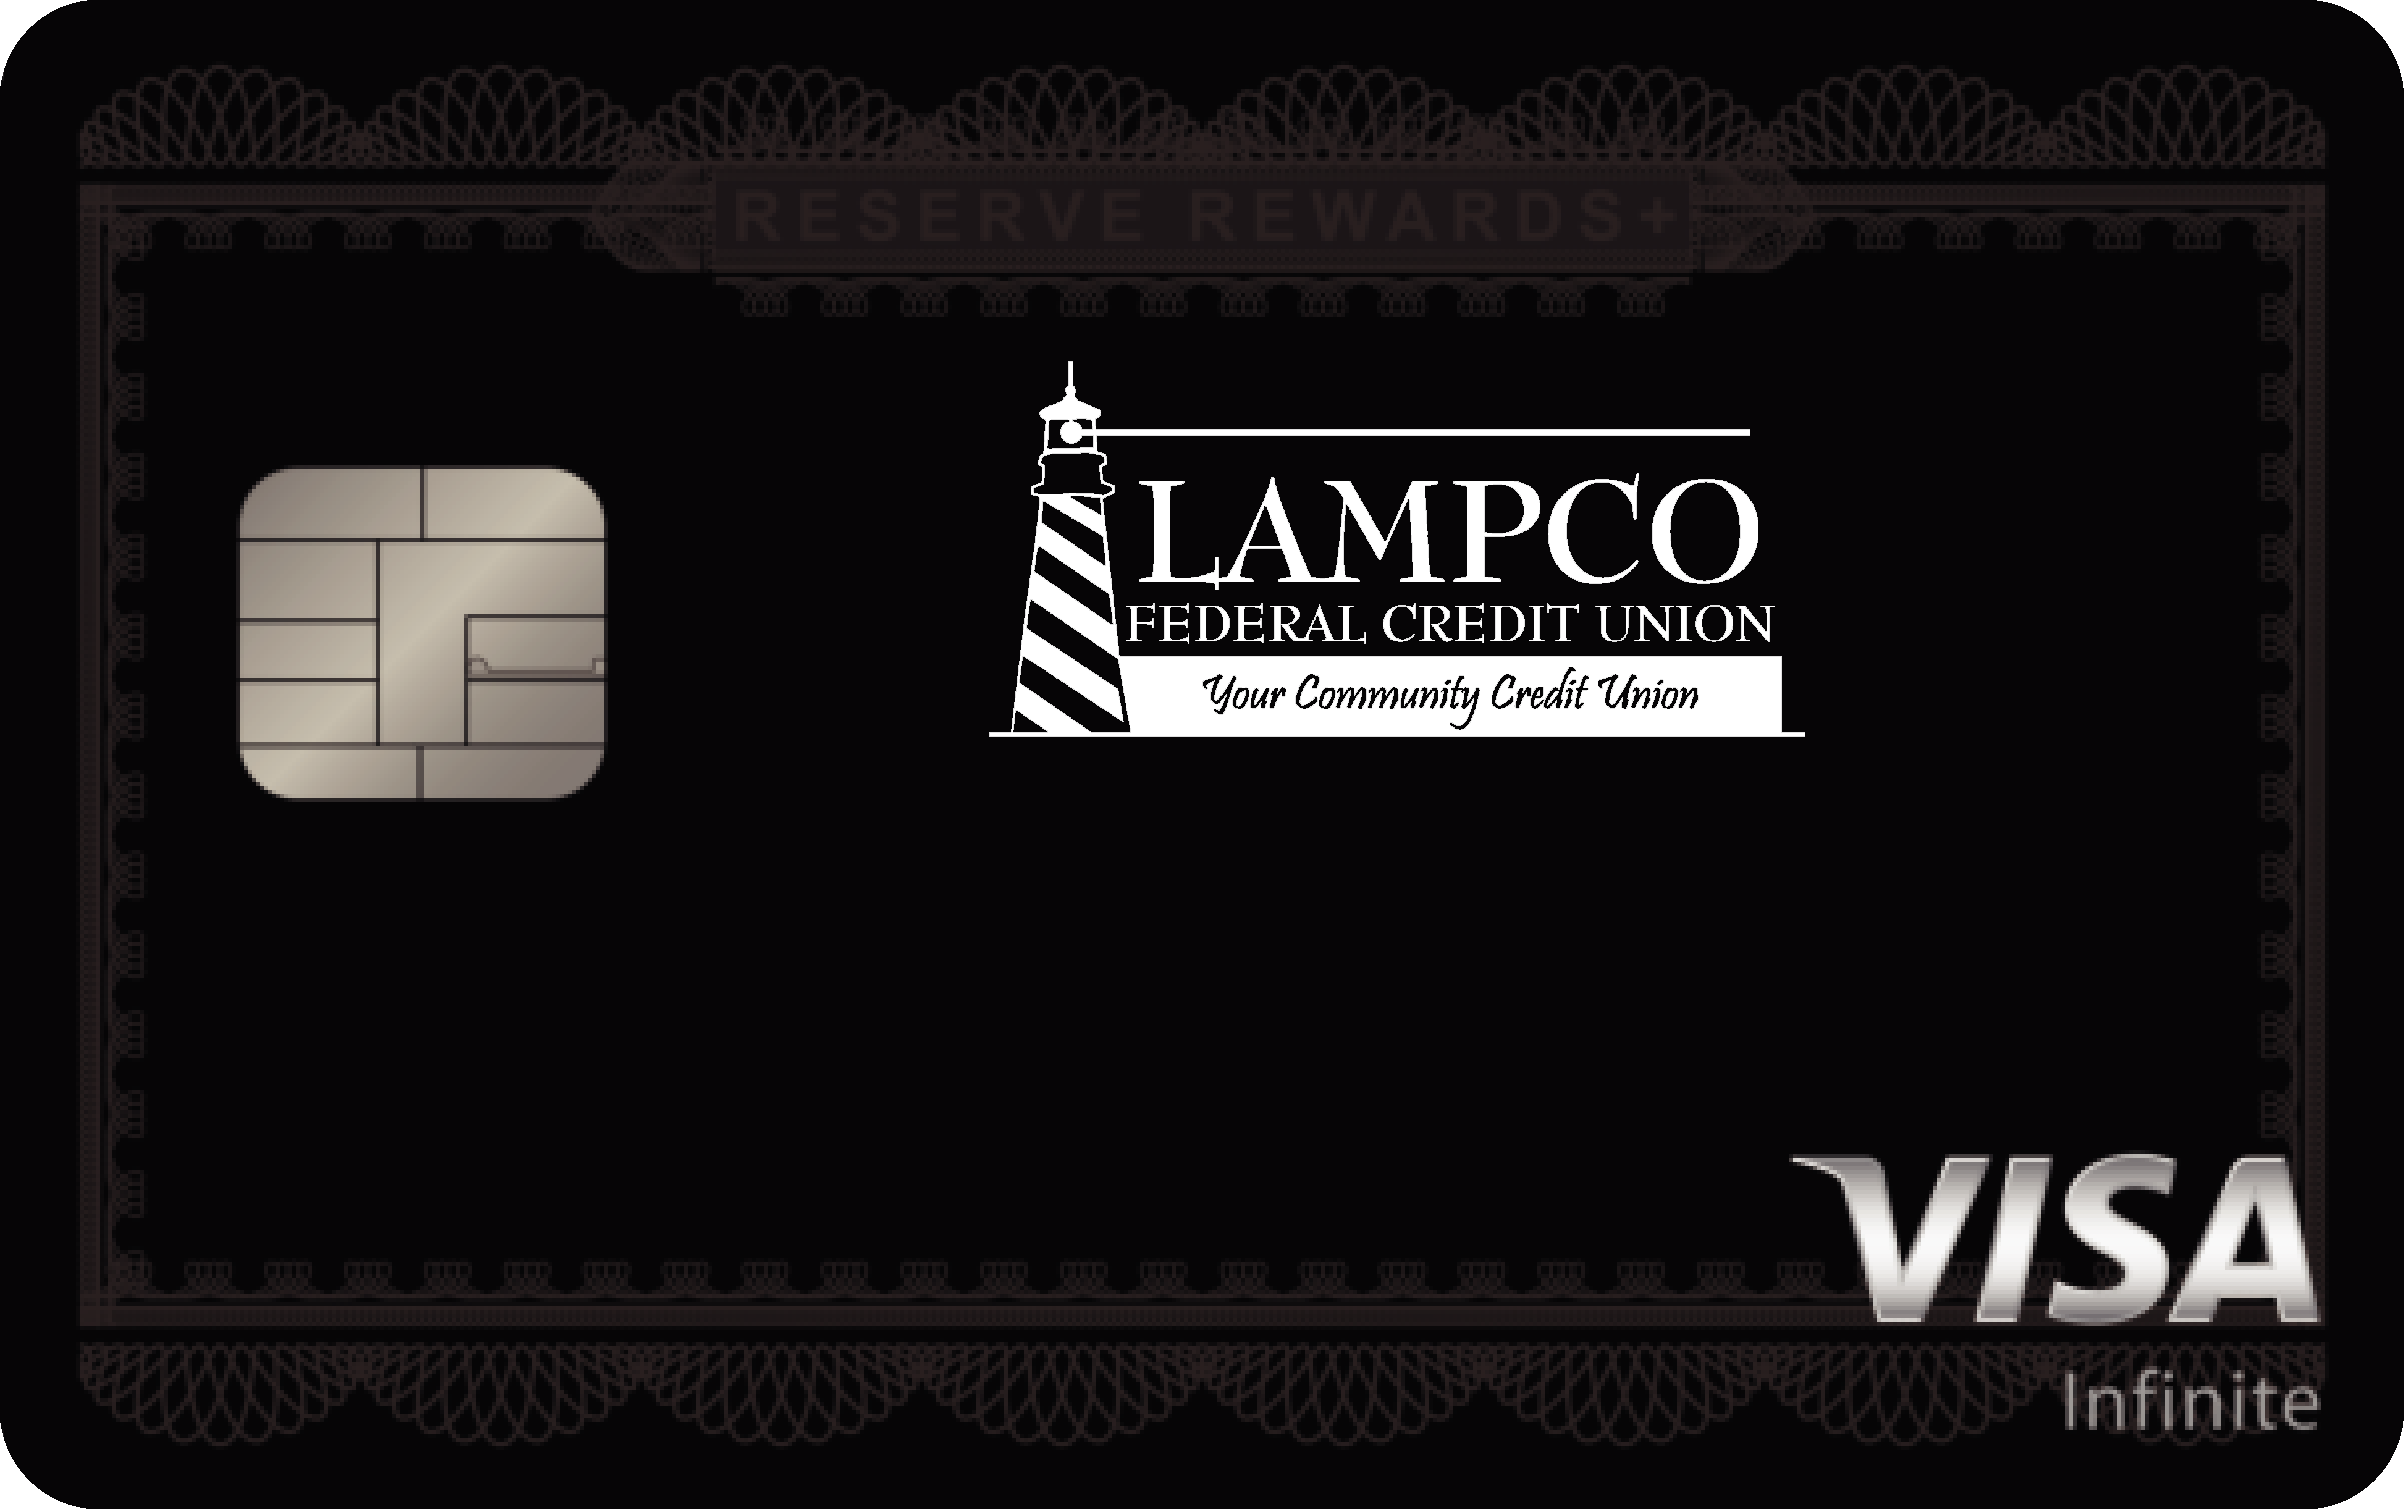 Lampco Federal Credit Union